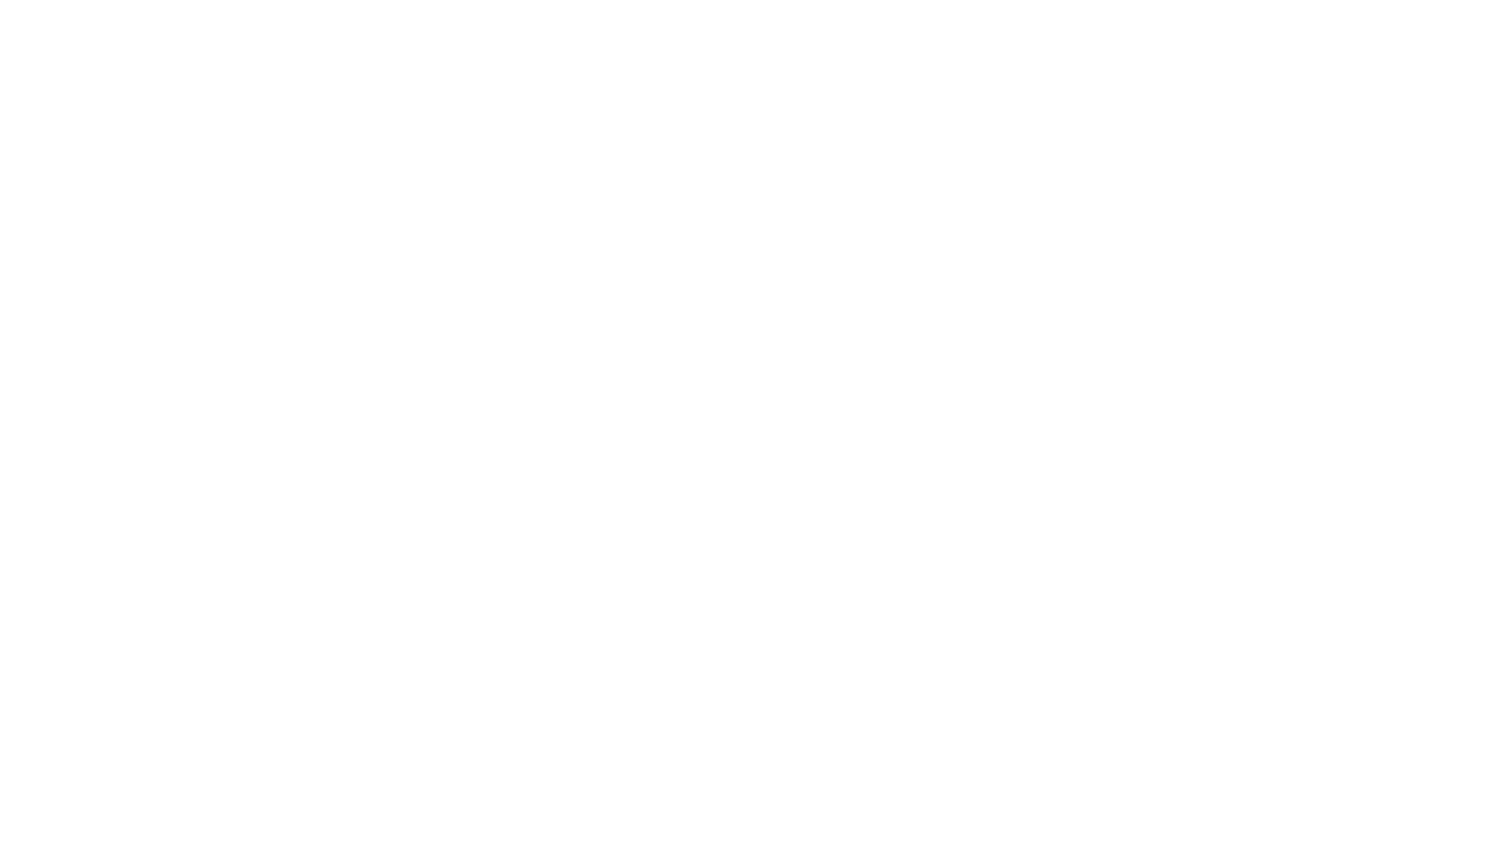 Sabine Technical Diving